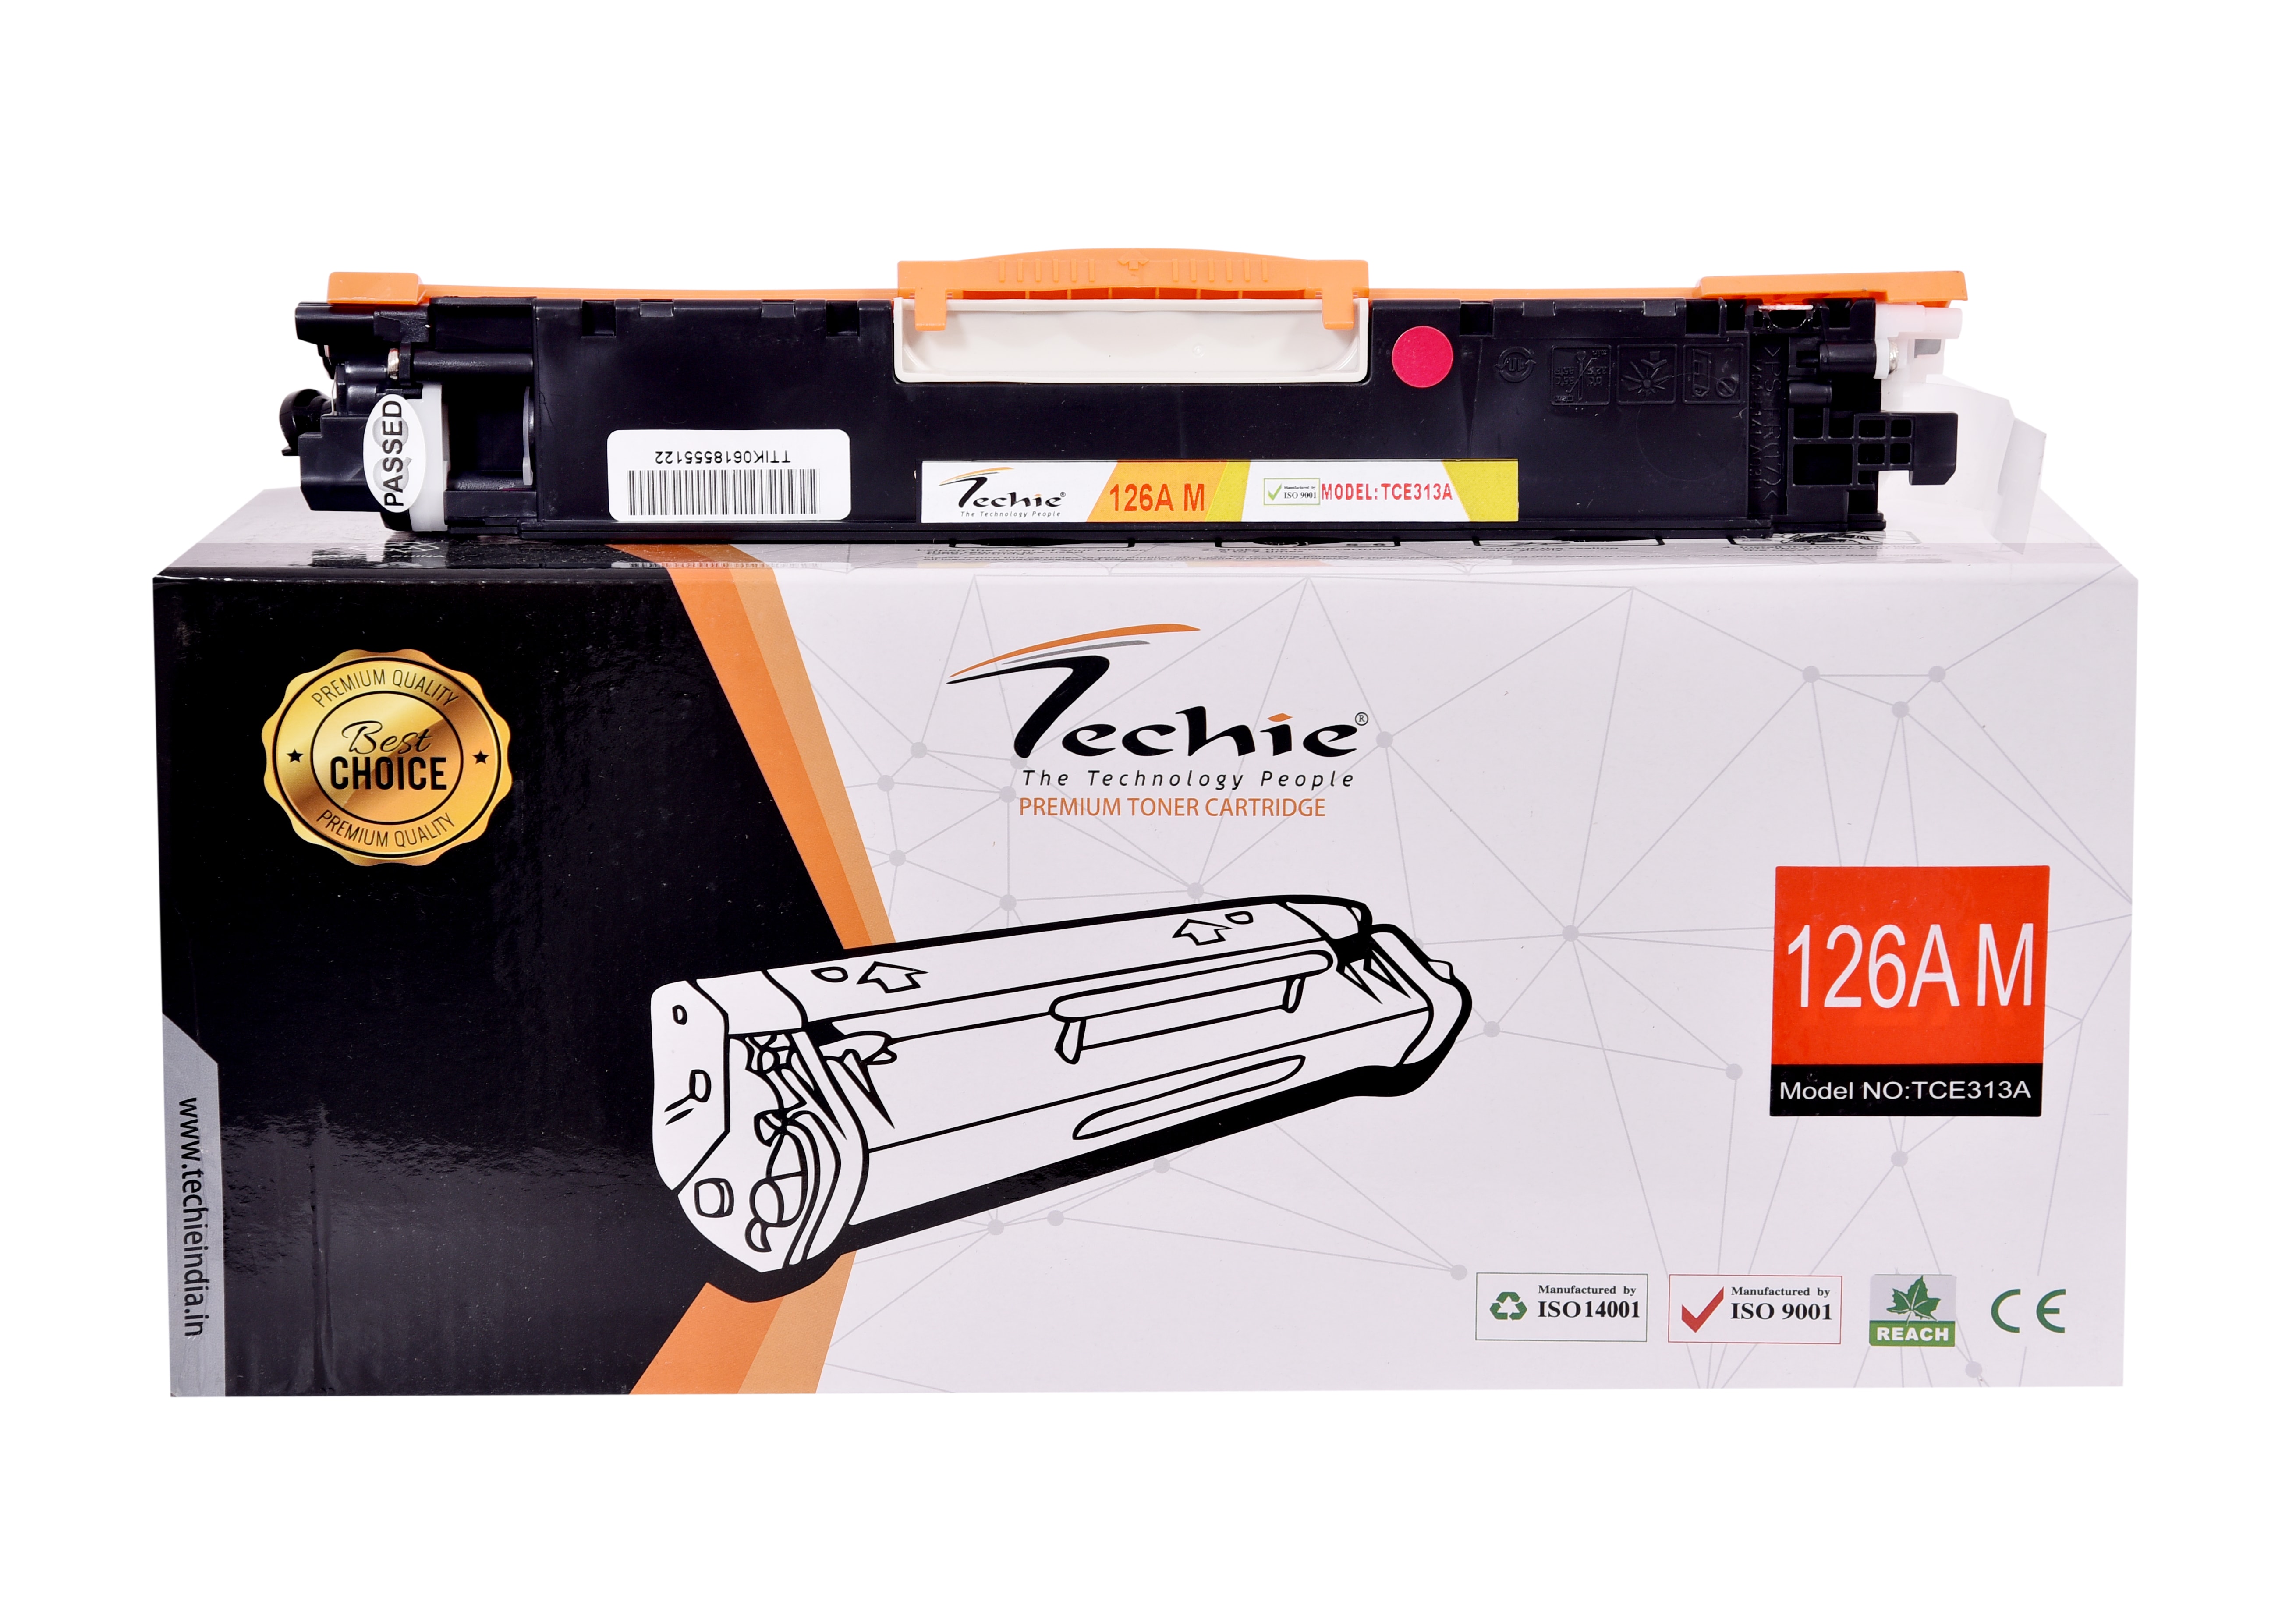 Techie 126A M Toner Cartridge Compatible for HP LaserJet Printer CP1025 , Cp1025NW Models